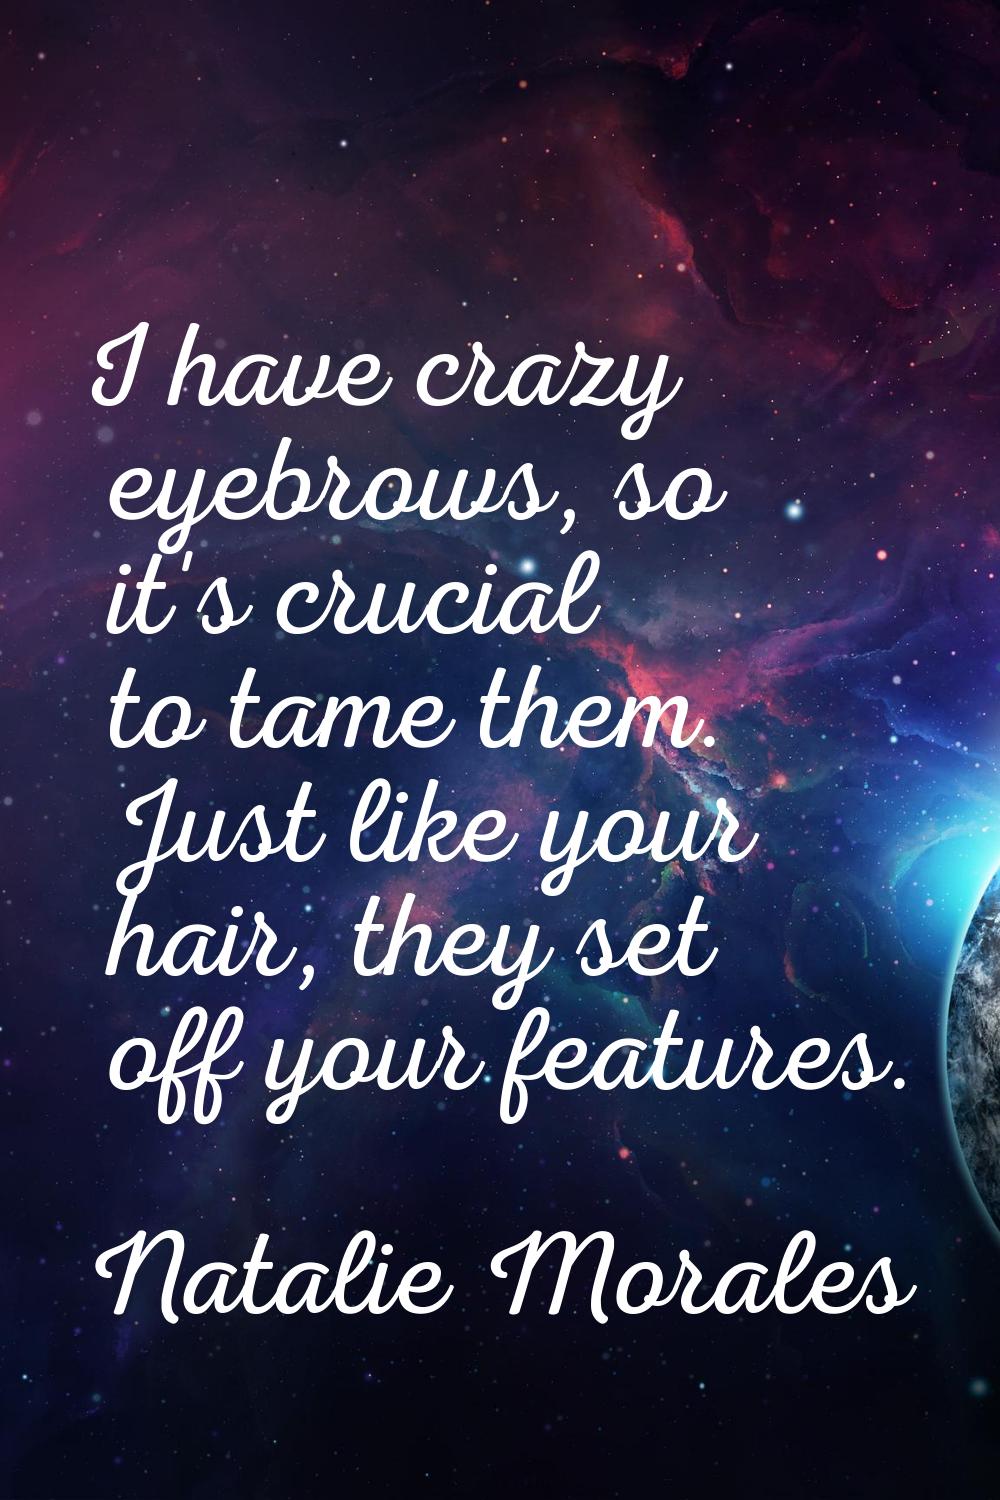 I have crazy eyebrows, so it's crucial to tame them. Just like your hair, they set off your feature